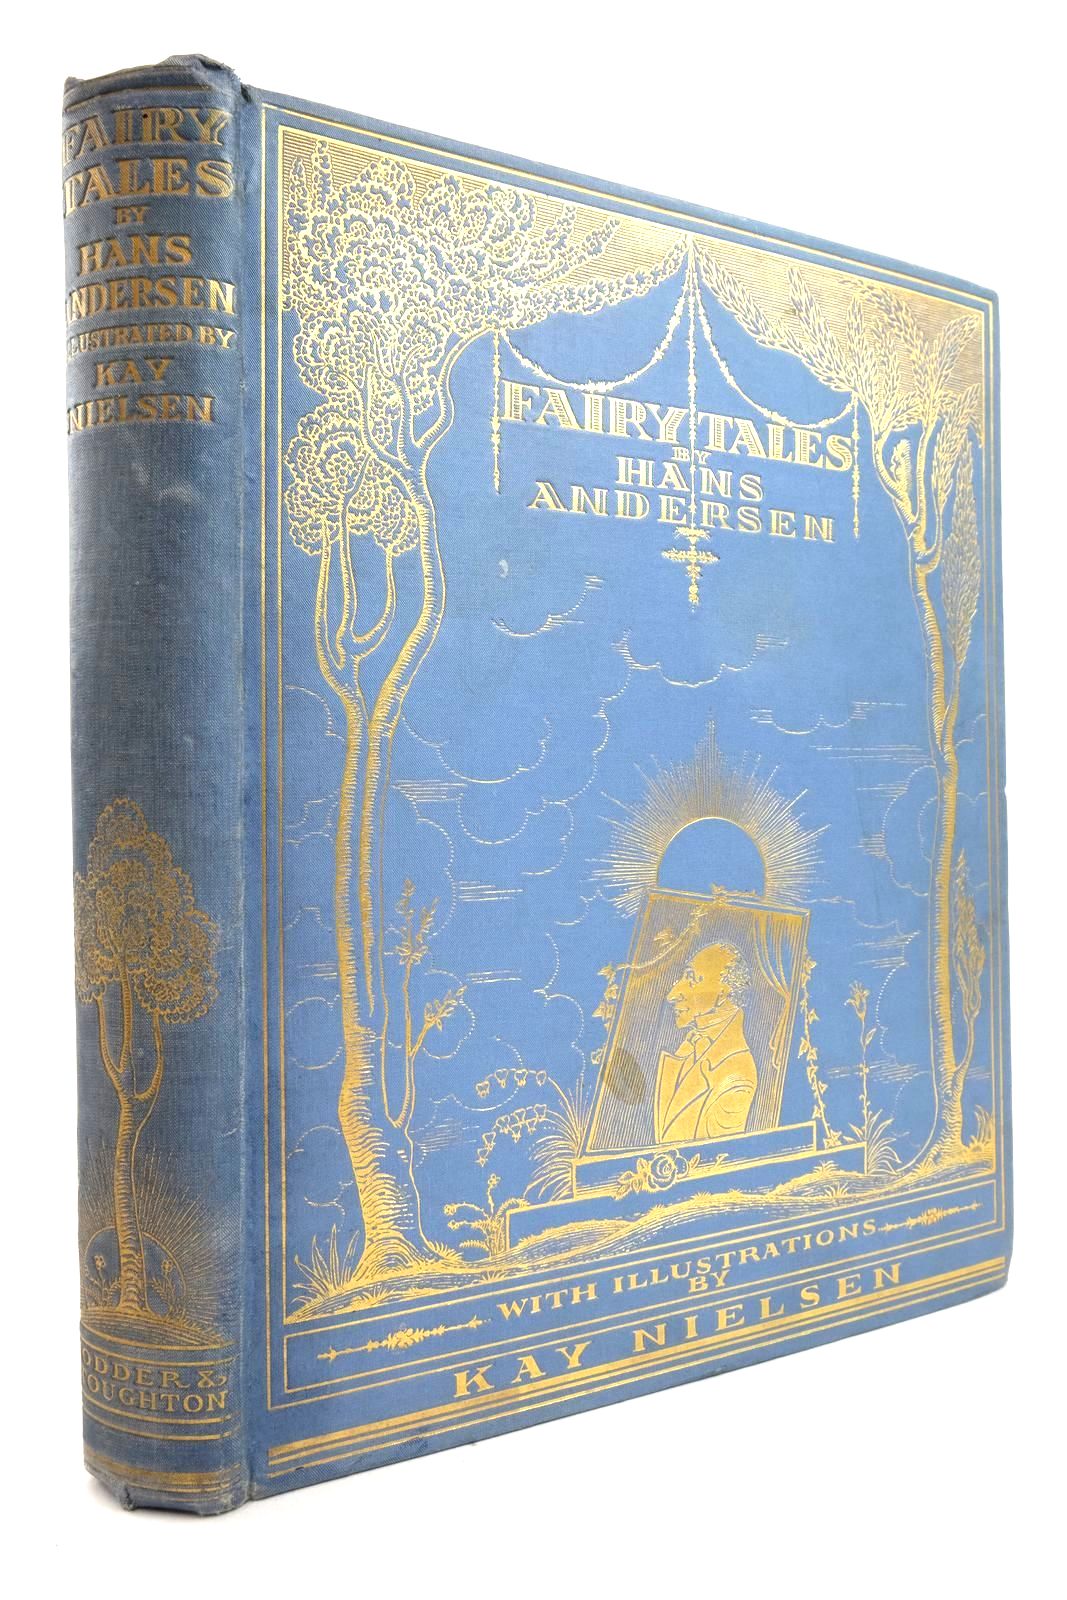 Photo of FAIRY TALES BY HANS ANDERSEN written by Andersen, Hans Christian illustrated by Nielsen, Kay published by Hodder &amp; Stoughton (STOCK CODE: 2137501)  for sale by Stella & Rose's Books